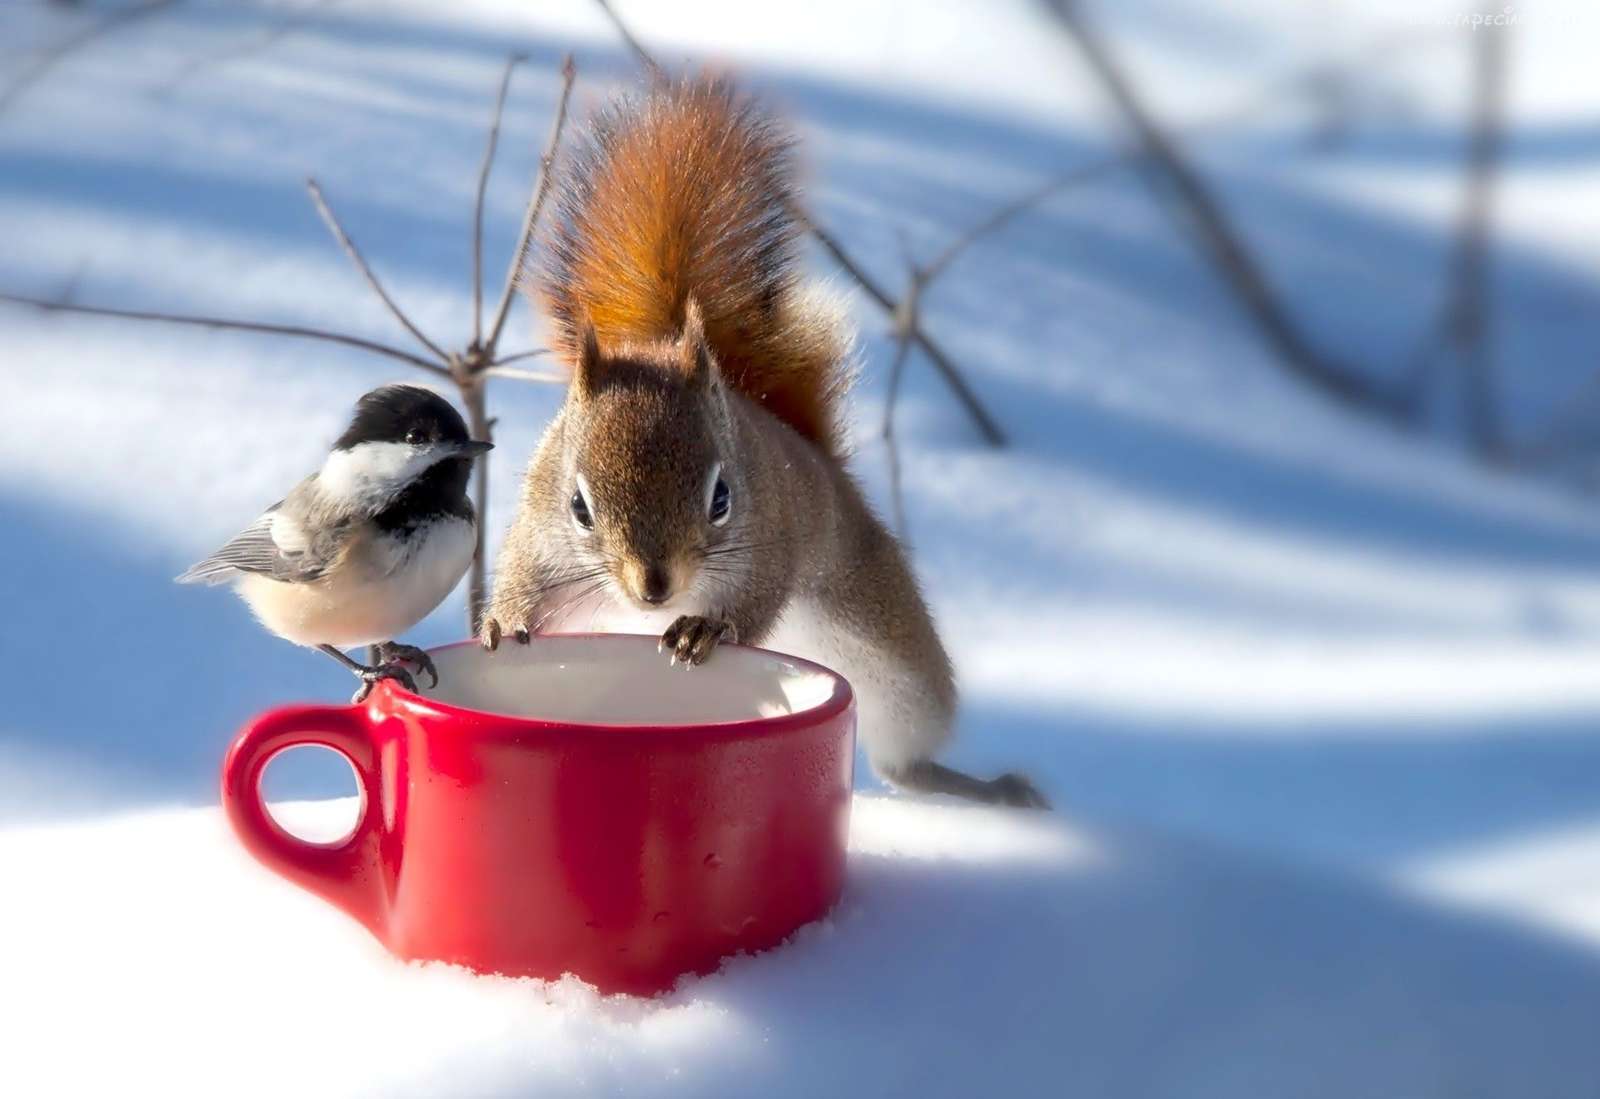 Winter friendship between a tit and a squirrel online puzzle